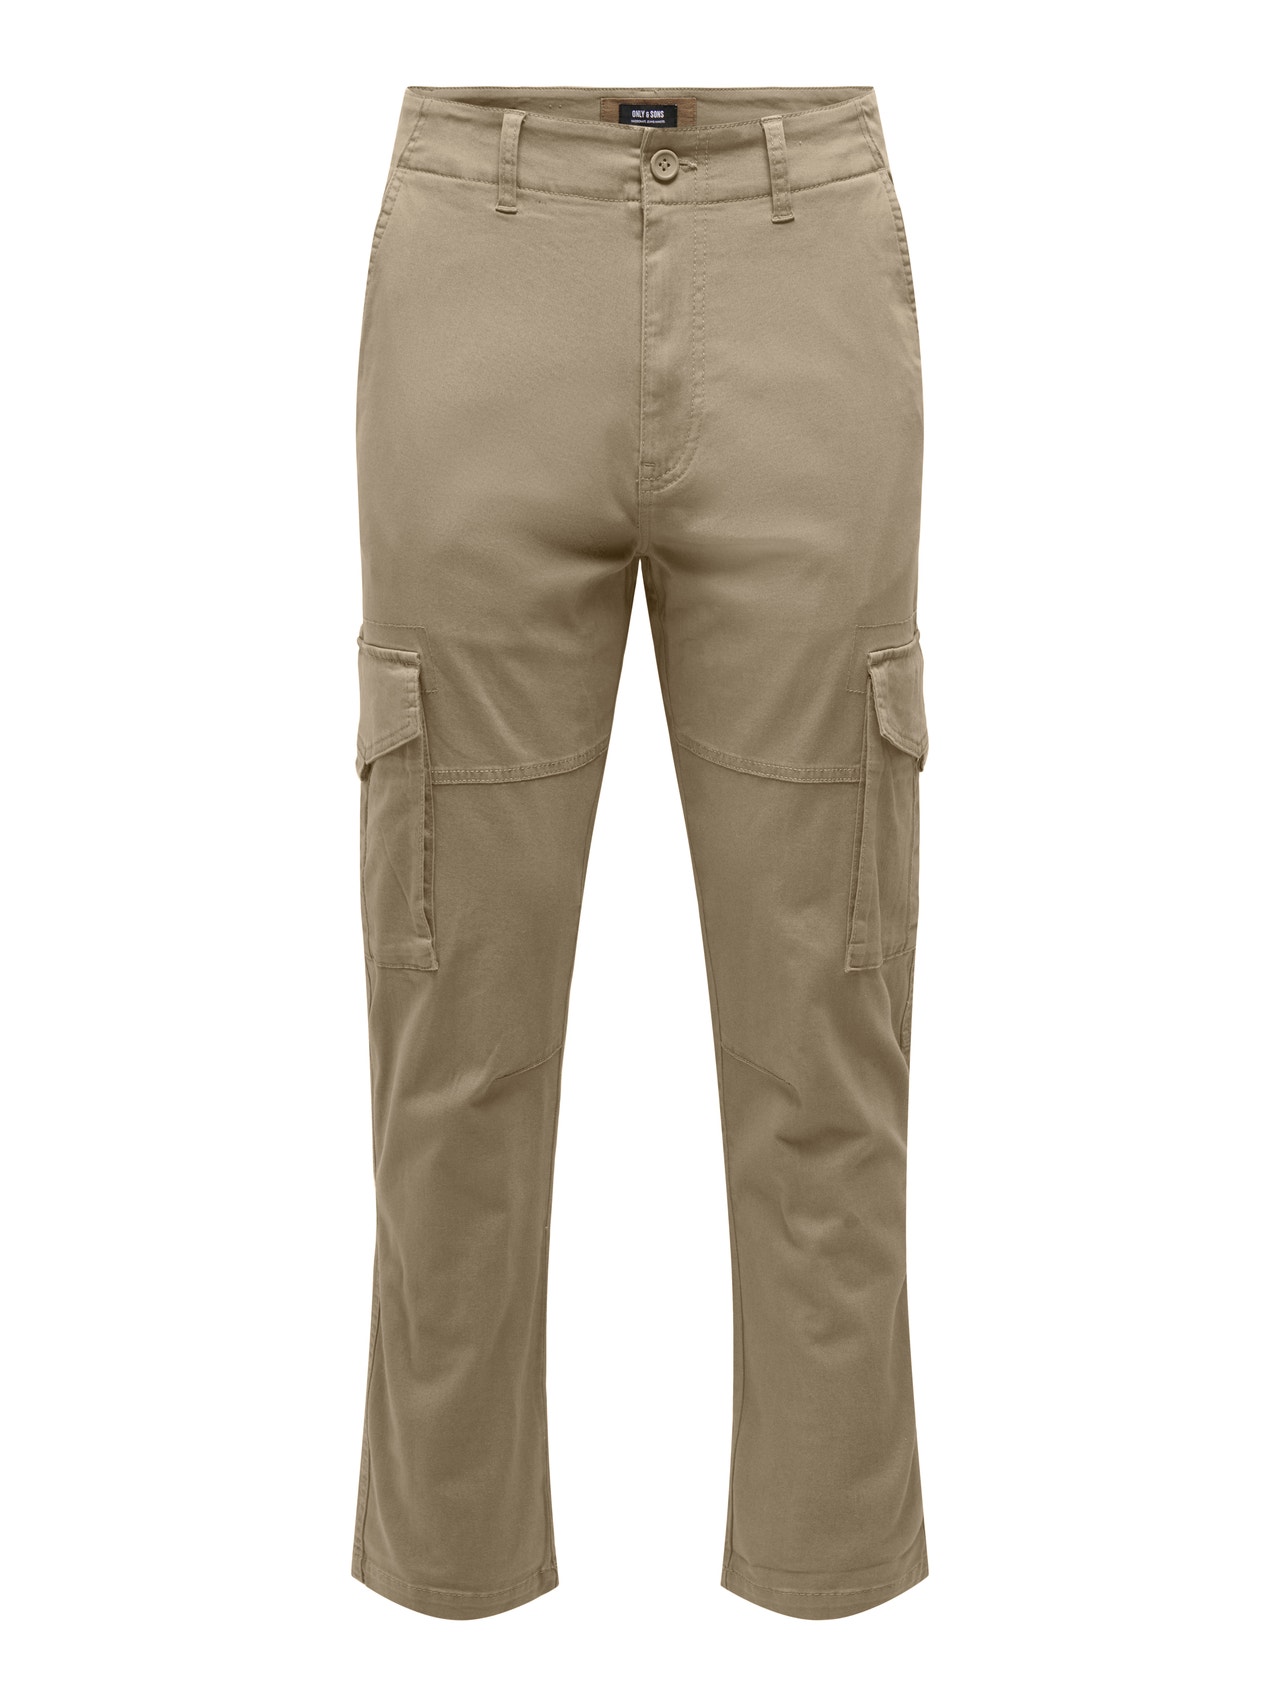 ONLY & SONS ONSDEAN LIFE TAP CARGO 0032 PANT NOOS -Crockery - 22025431